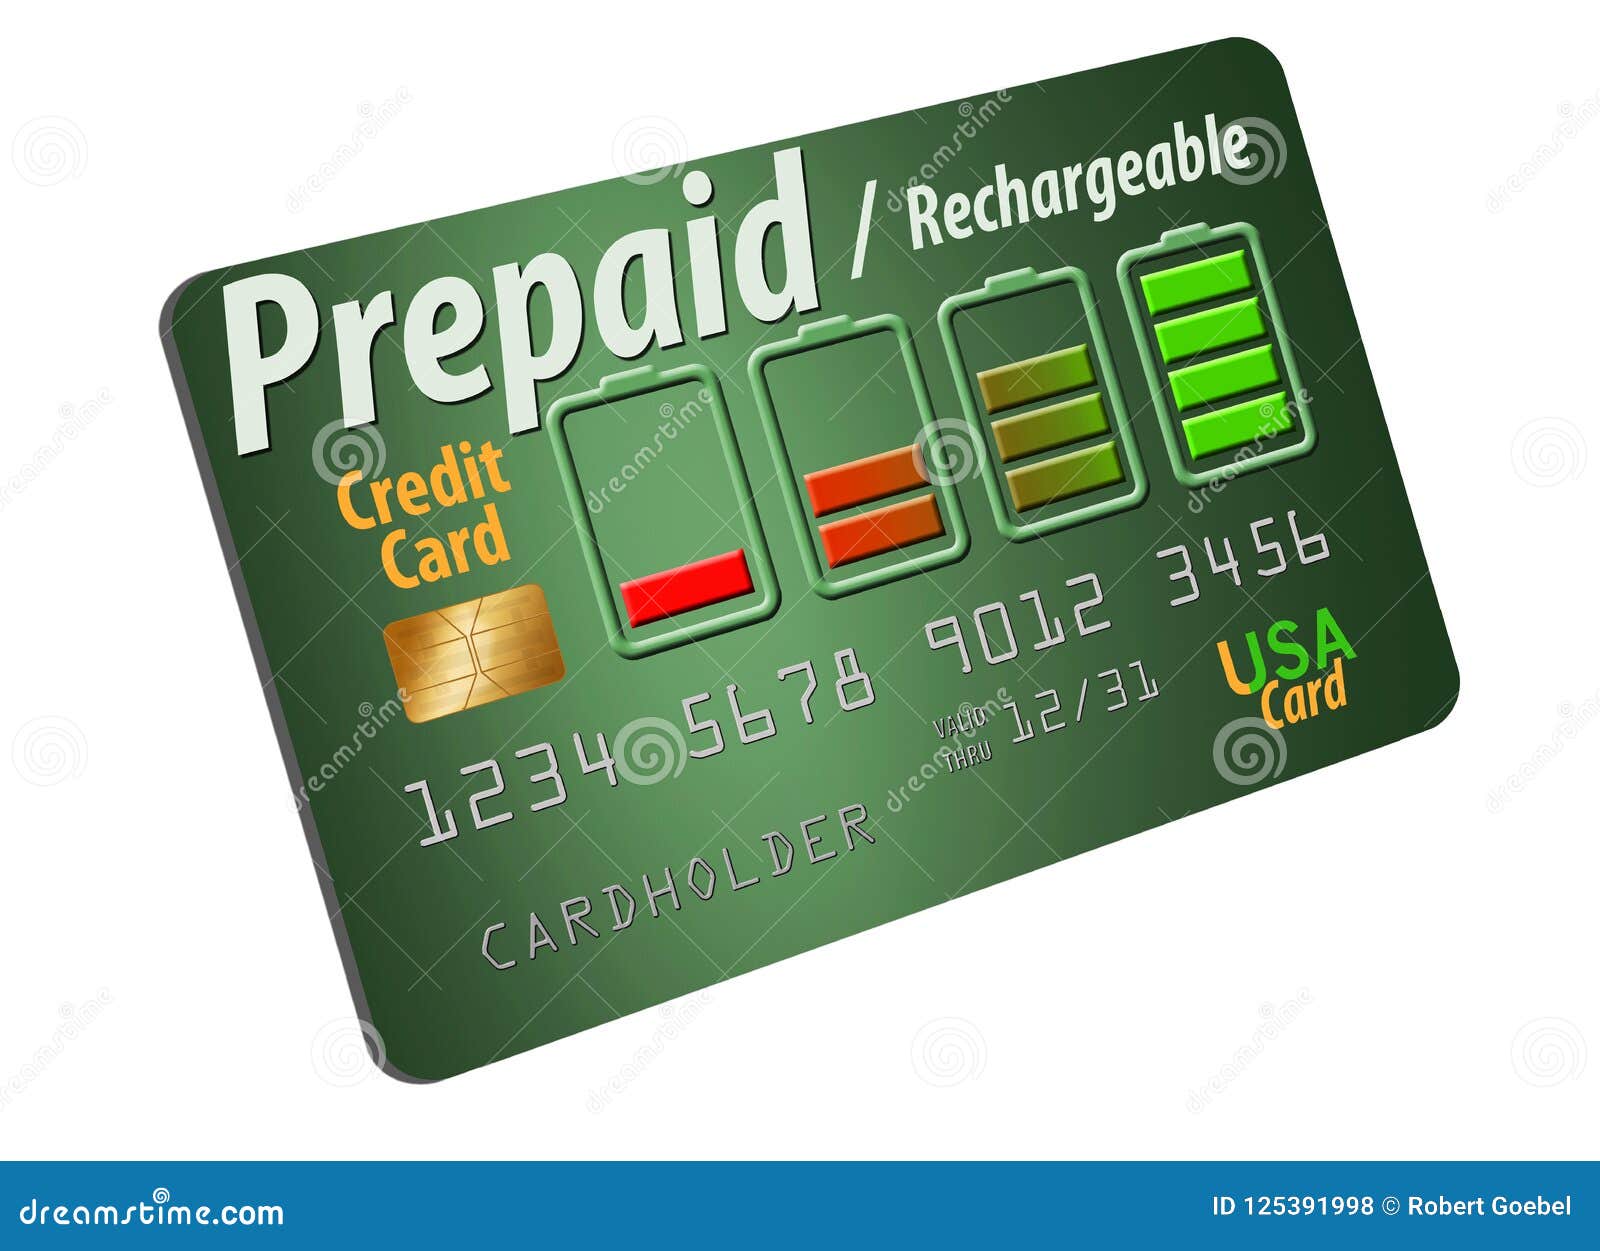 Here Is A Rechargeable, Refillable Prepaid Credit Card. Stock Illustration - Illustration of ...